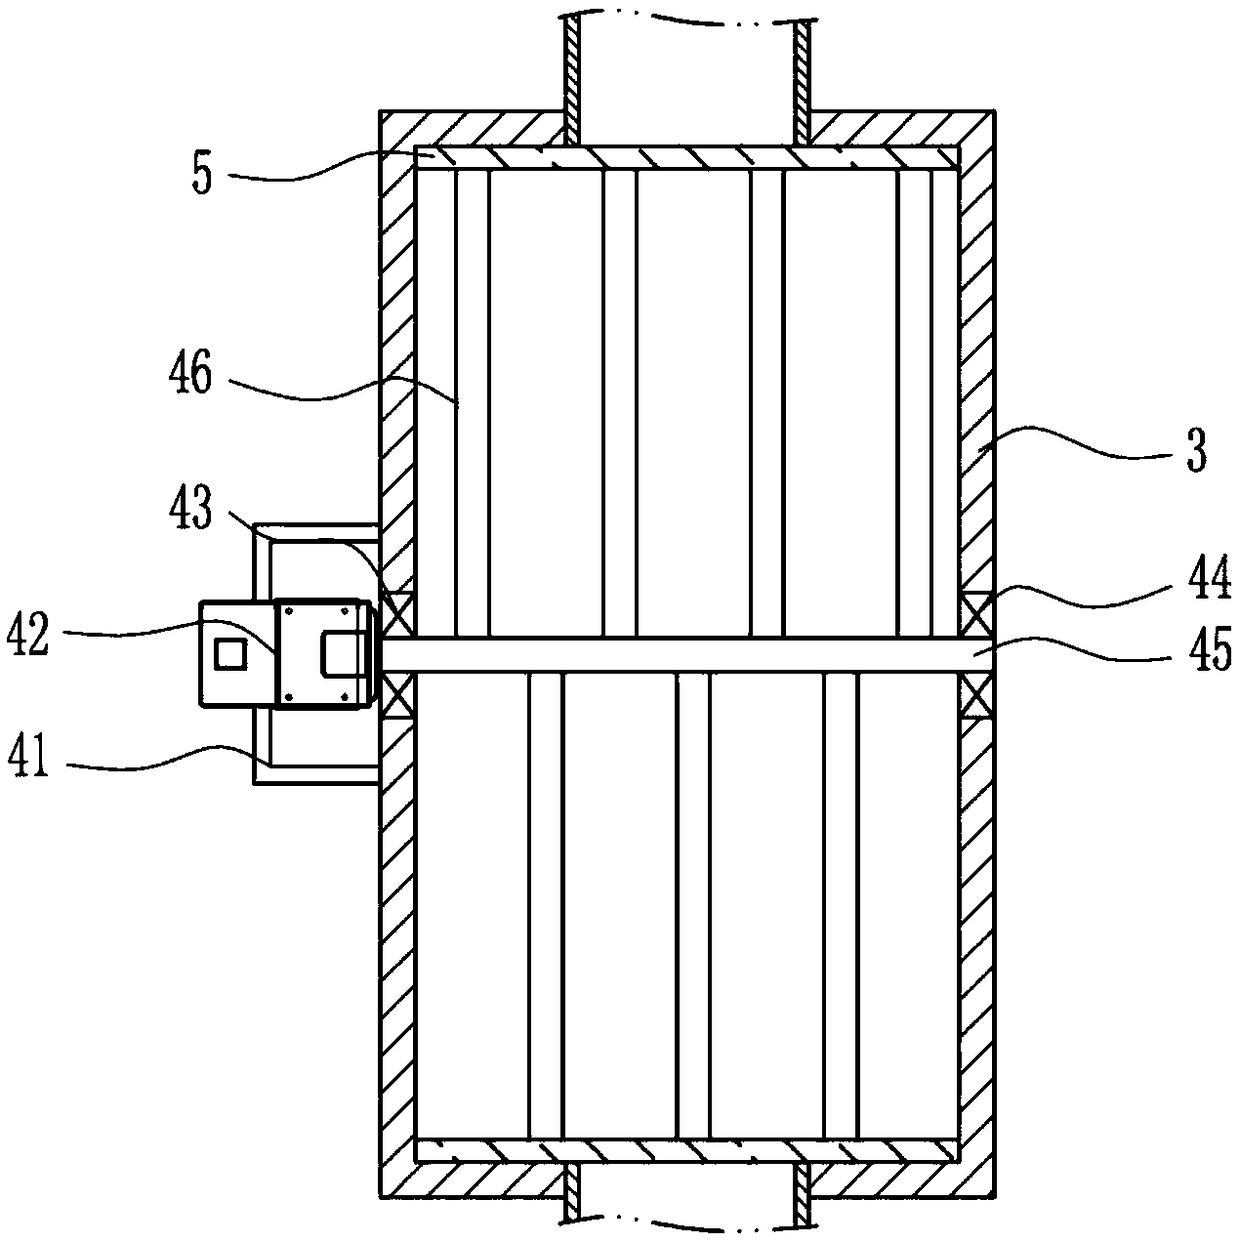 Industrial sewage treatment device